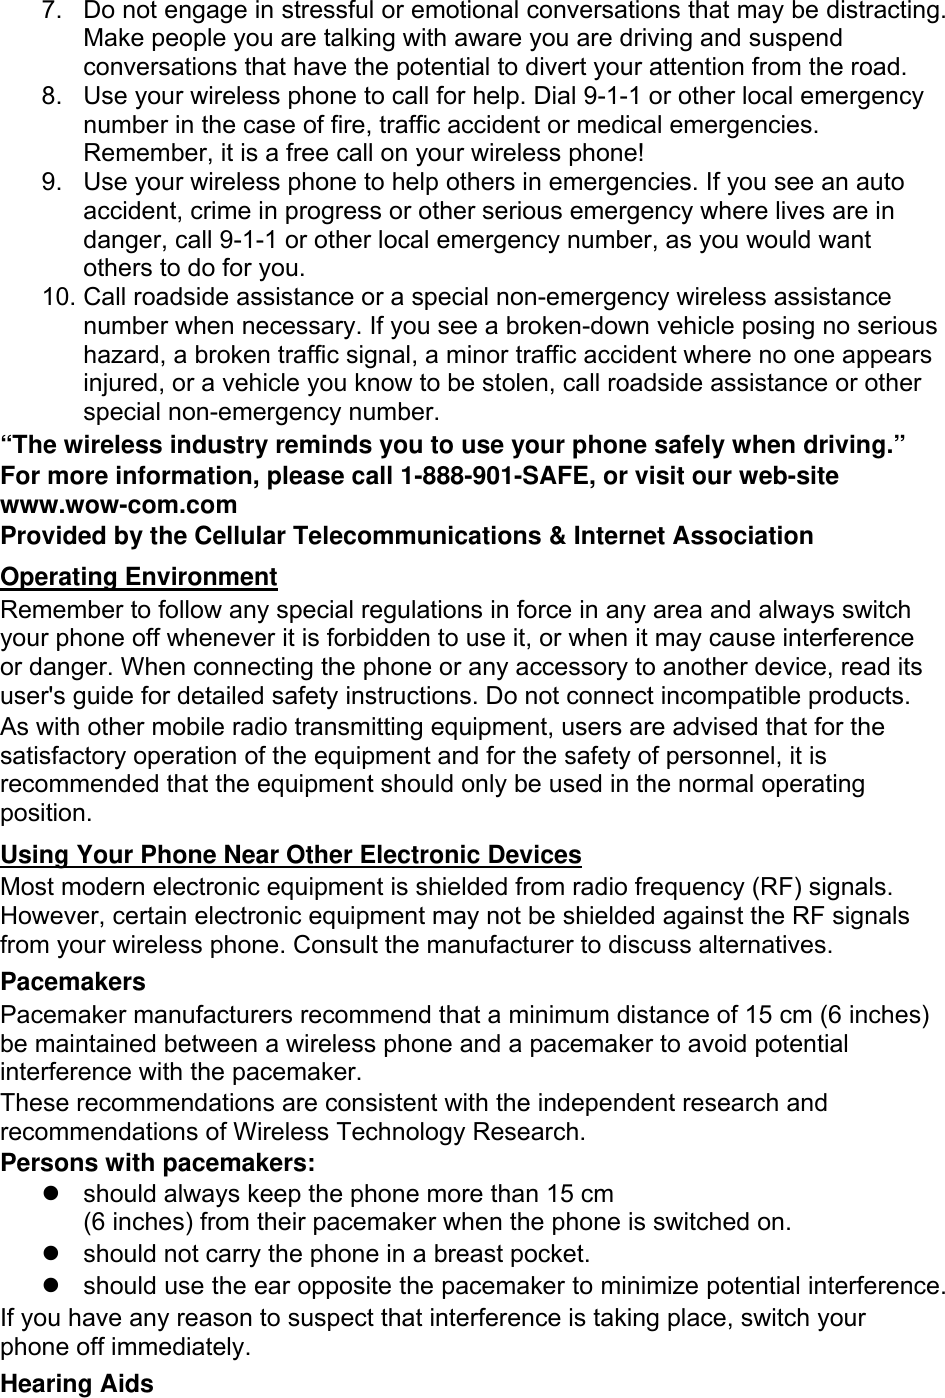 7.  Do not engage in stressful or emotional conversations that may be distracting. Make people you are talking with aware you are driving and suspend conversations that have the potential to divert your attention from the road. 8.  Use your wireless phone to call for help. Dial 9-1-1 or other local emergency number in the case of fire, traffic accident or medical emergencies. Remember, it is a free call on your wireless phone! 9.  Use your wireless phone to help others in emergencies. If you see an auto accident, crime in progress or other serious emergency where lives are in danger, call 9-1-1 or other local emergency number, as you would want others to do for you. 10. Call roadside assistance or a special non-emergency wireless assistance number when necessary. If you see a broken-down vehicle posing no serious hazard, a broken traffic signal, a minor traffic accident where no one appears injured, or a vehicle you know to be stolen, call roadside assistance or other special non-emergency number. “The wireless industry reminds you to use your phone safely when driving.” For more information, please call 1-888-901-SAFE, or visit our web-site www.wow-com.com Provided by the Cellular Telecommunications &amp; Internet Association Operating Environment Remember to follow any special regulations in force in any area and always switch your phone off whenever it is forbidden to use it, or when it may cause interference or danger. When connecting the phone or any accessory to another device, read its user&apos;s guide for detailed safety instructions. Do not connect incompatible products. As with other mobile radio transmitting equipment, users are advised that for the satisfactory operation of the equipment and for the safety of personnel, it is recommended that the equipment should only be used in the normal operating position. Using Your Phone Near Other Electronic Devices Most modern electronic equipment is shielded from radio frequency (RF) signals. However, certain electronic equipment may not be shielded against the RF signals from your wireless phone. Consult the manufacturer to discuss alternatives. Pacemakers Pacemaker manufacturers recommend that a minimum distance of 15 cm (6 inches) be maintained between a wireless phone and a pacemaker to avoid potential interference with the pacemaker. These recommendations are consistent with the independent research and recommendations of Wireless Technology Research. Persons with pacemakers:   should always keep the phone more than 15 cm   (6 inches) from their pacemaker when the phone is switched on.   should not carry the phone in a breast pocket.   should use the ear opposite the pacemaker to minimize potential interference. If you have any reason to suspect that interference is taking place, switch your phone off immediately. Hearing Aids 